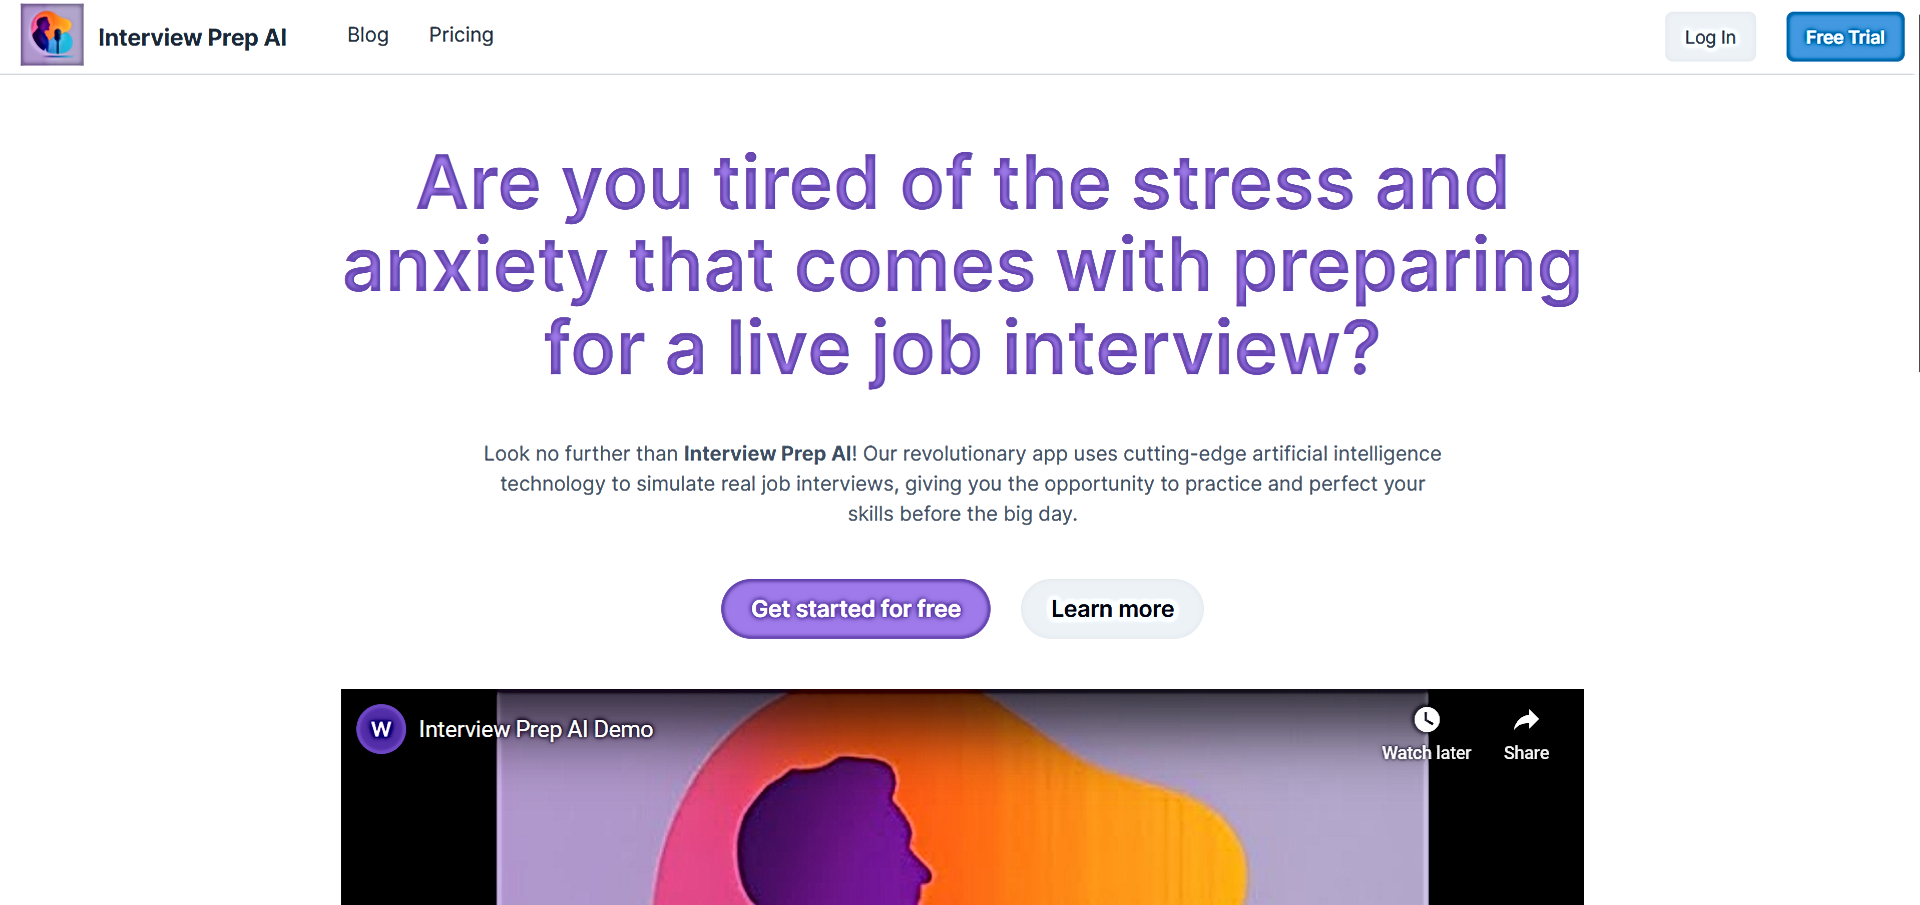 Interview Prep AI featured